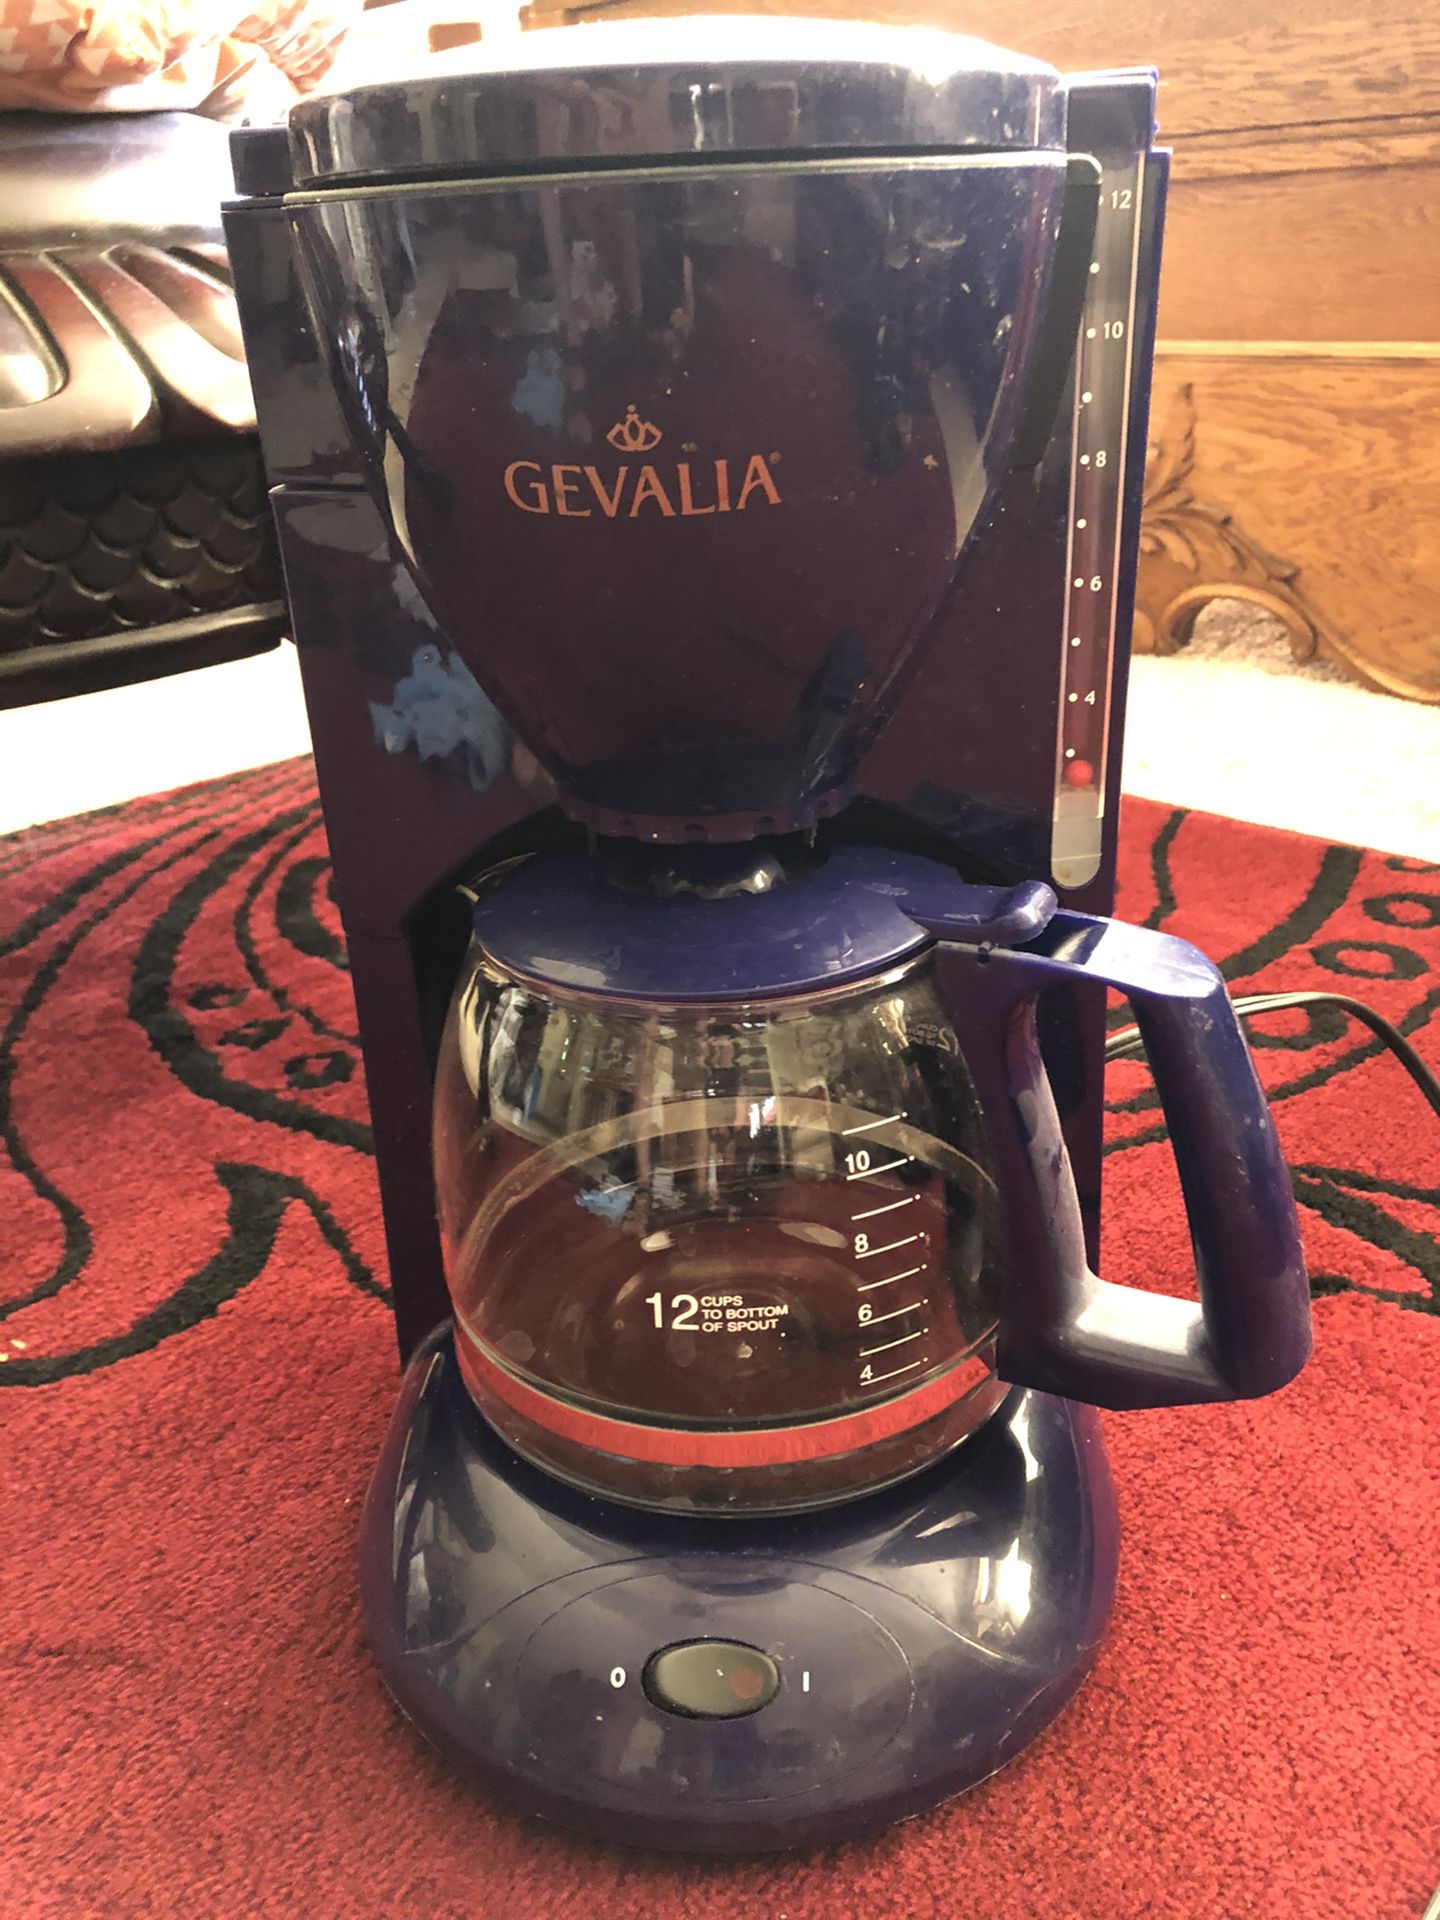 Gevalia. Call {contact info removed}